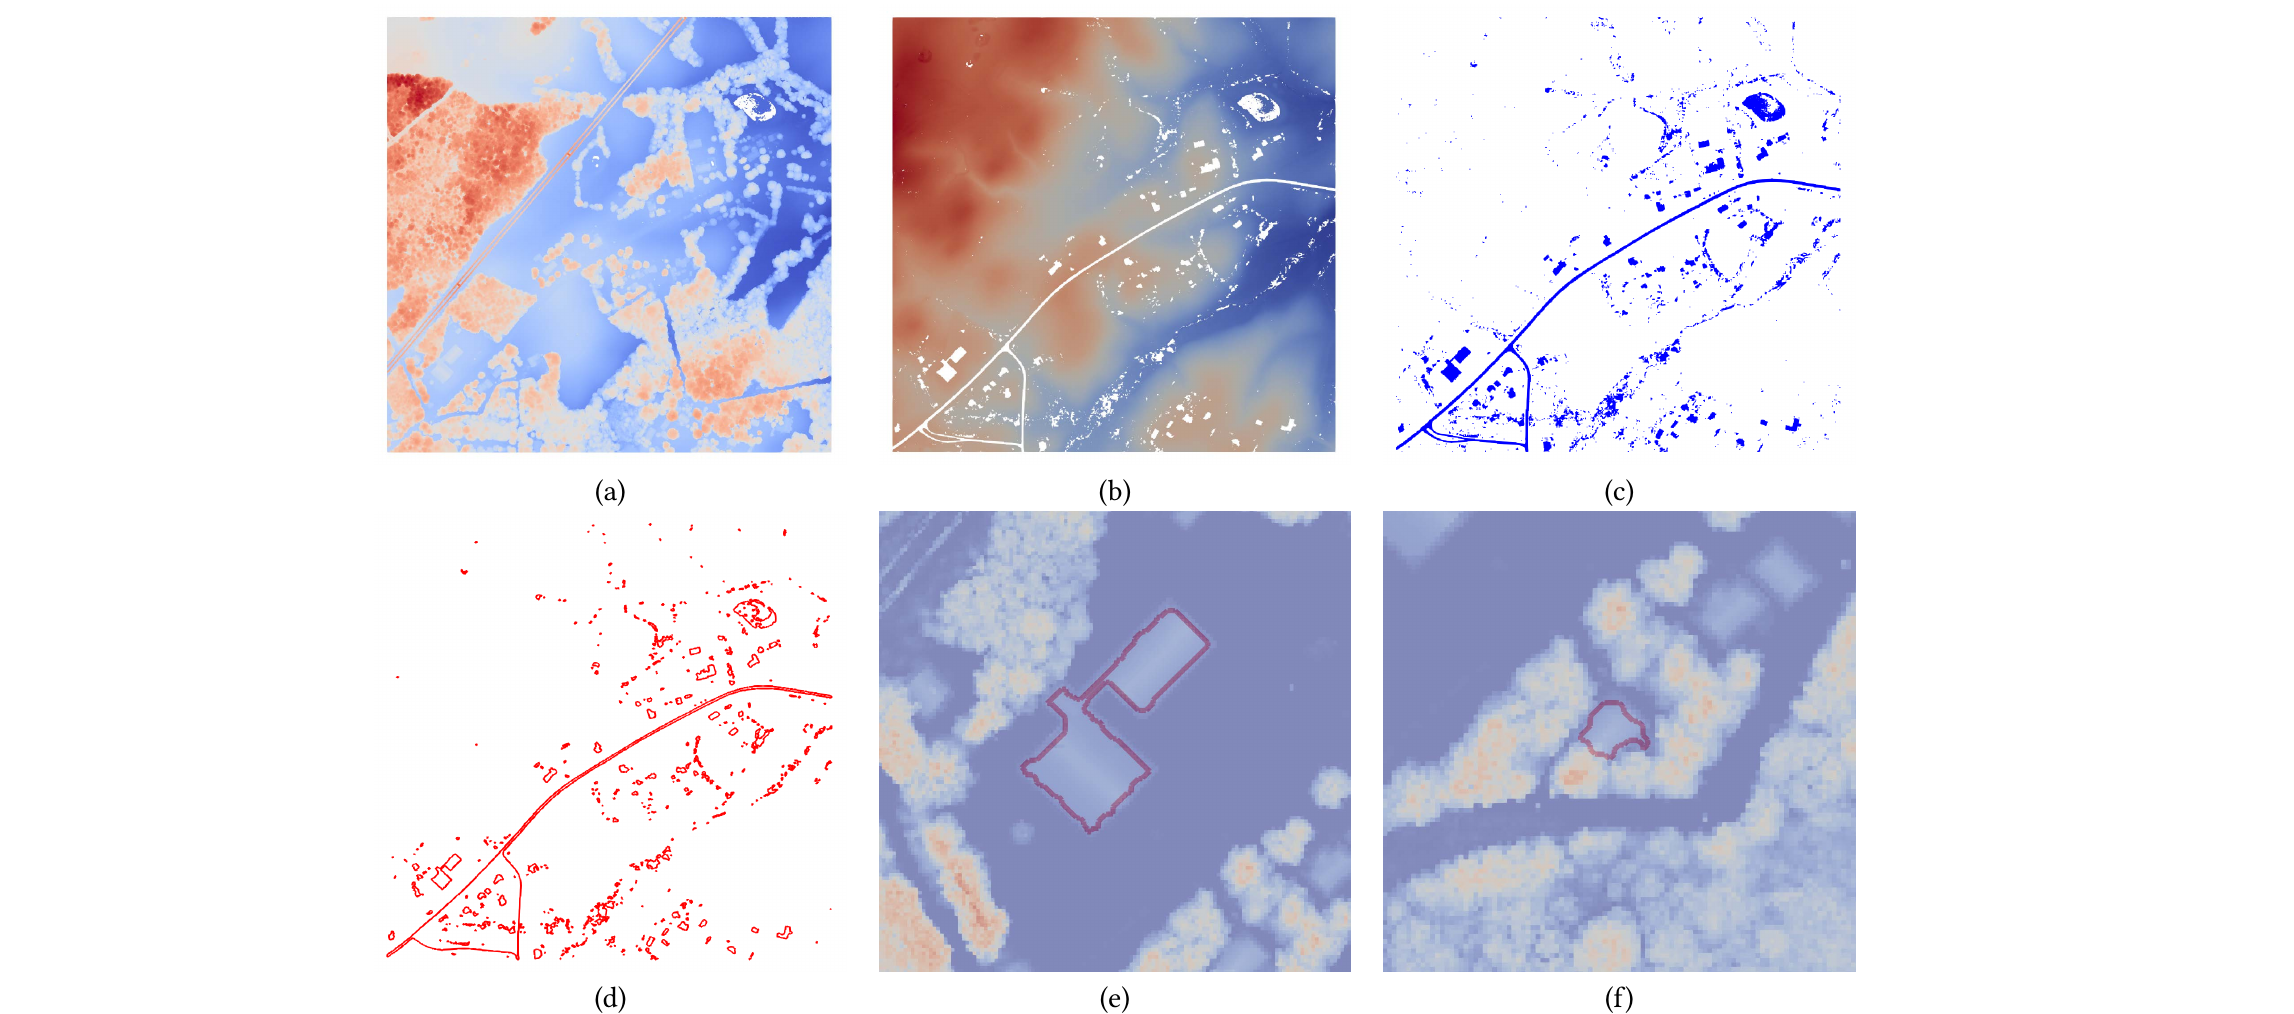 An unsupervised building footprints delineation approach for large-scale LiDAR point clouds